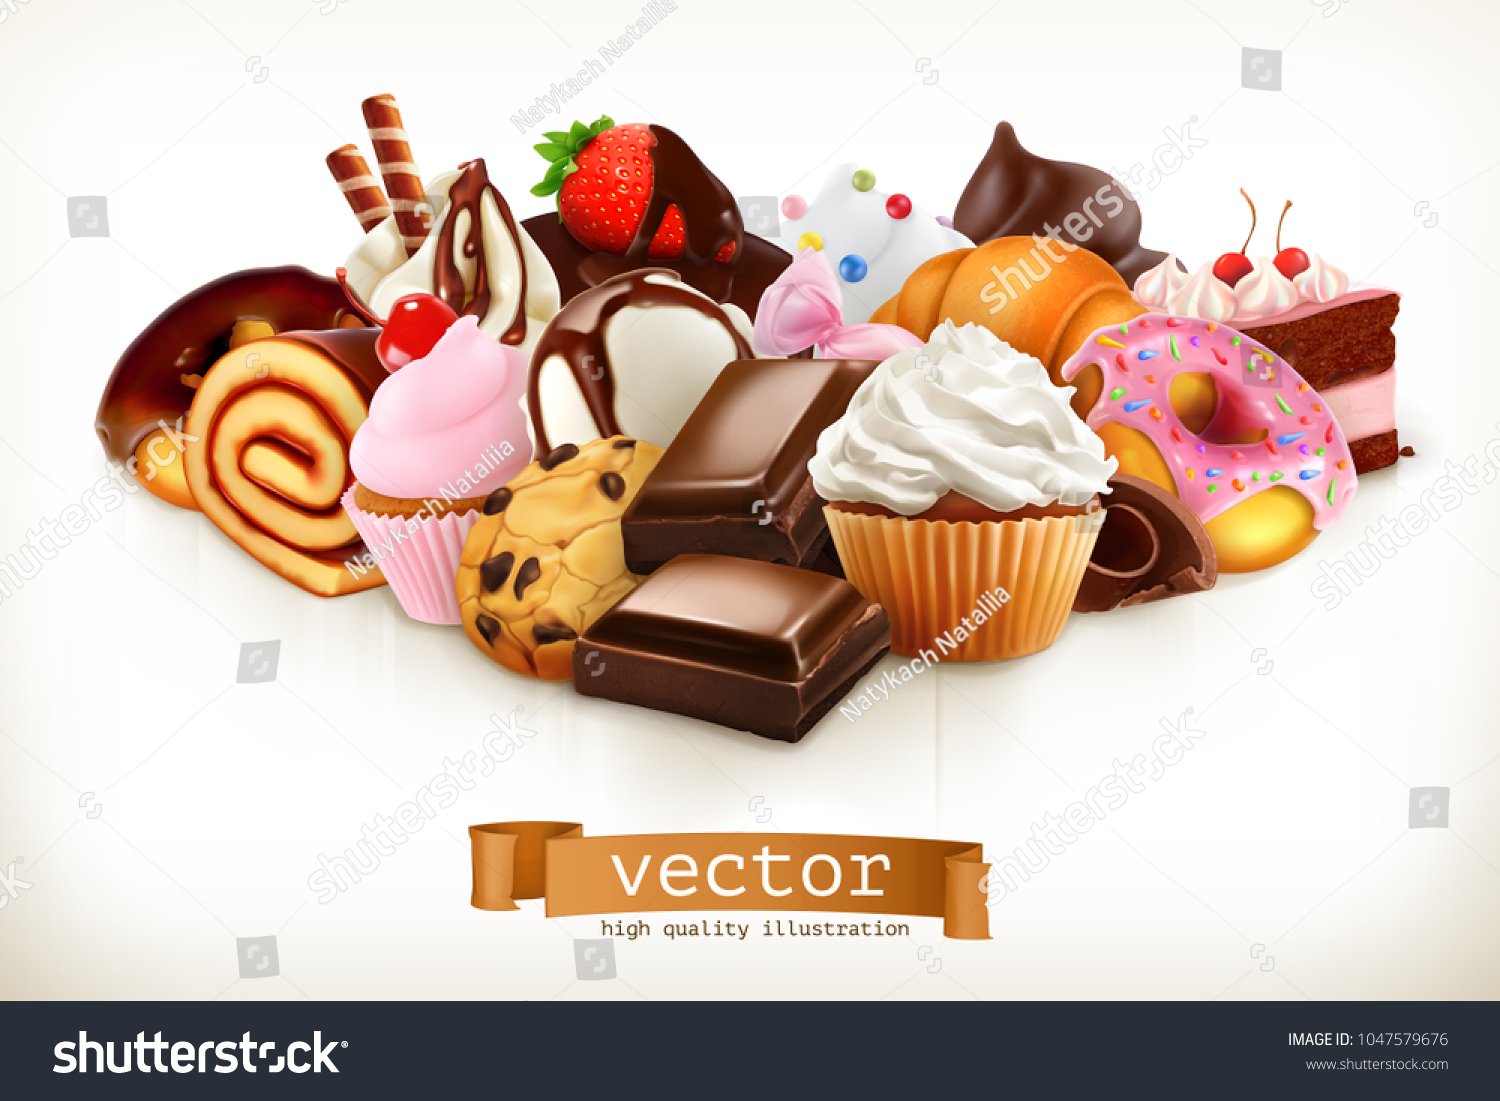 Confectionery. Chocolate, cakes, cupcakes, donuts. 3d realistic vector #1047579676